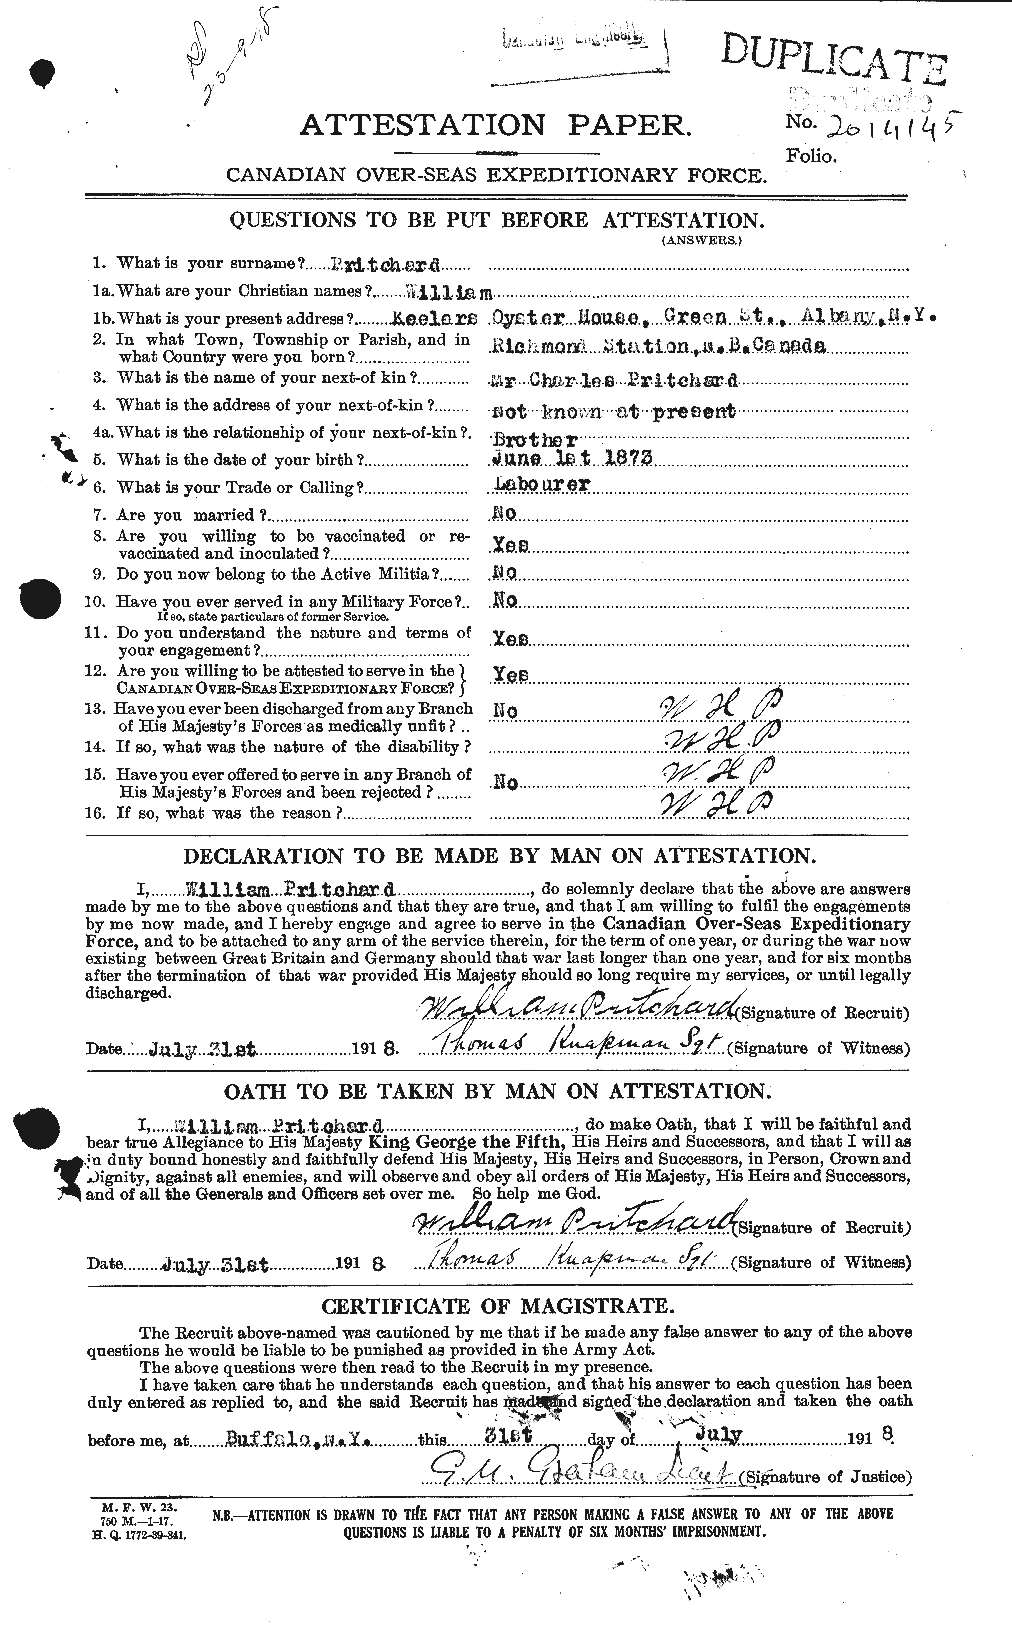 Personnel Records of the First World War - CEF 588623a